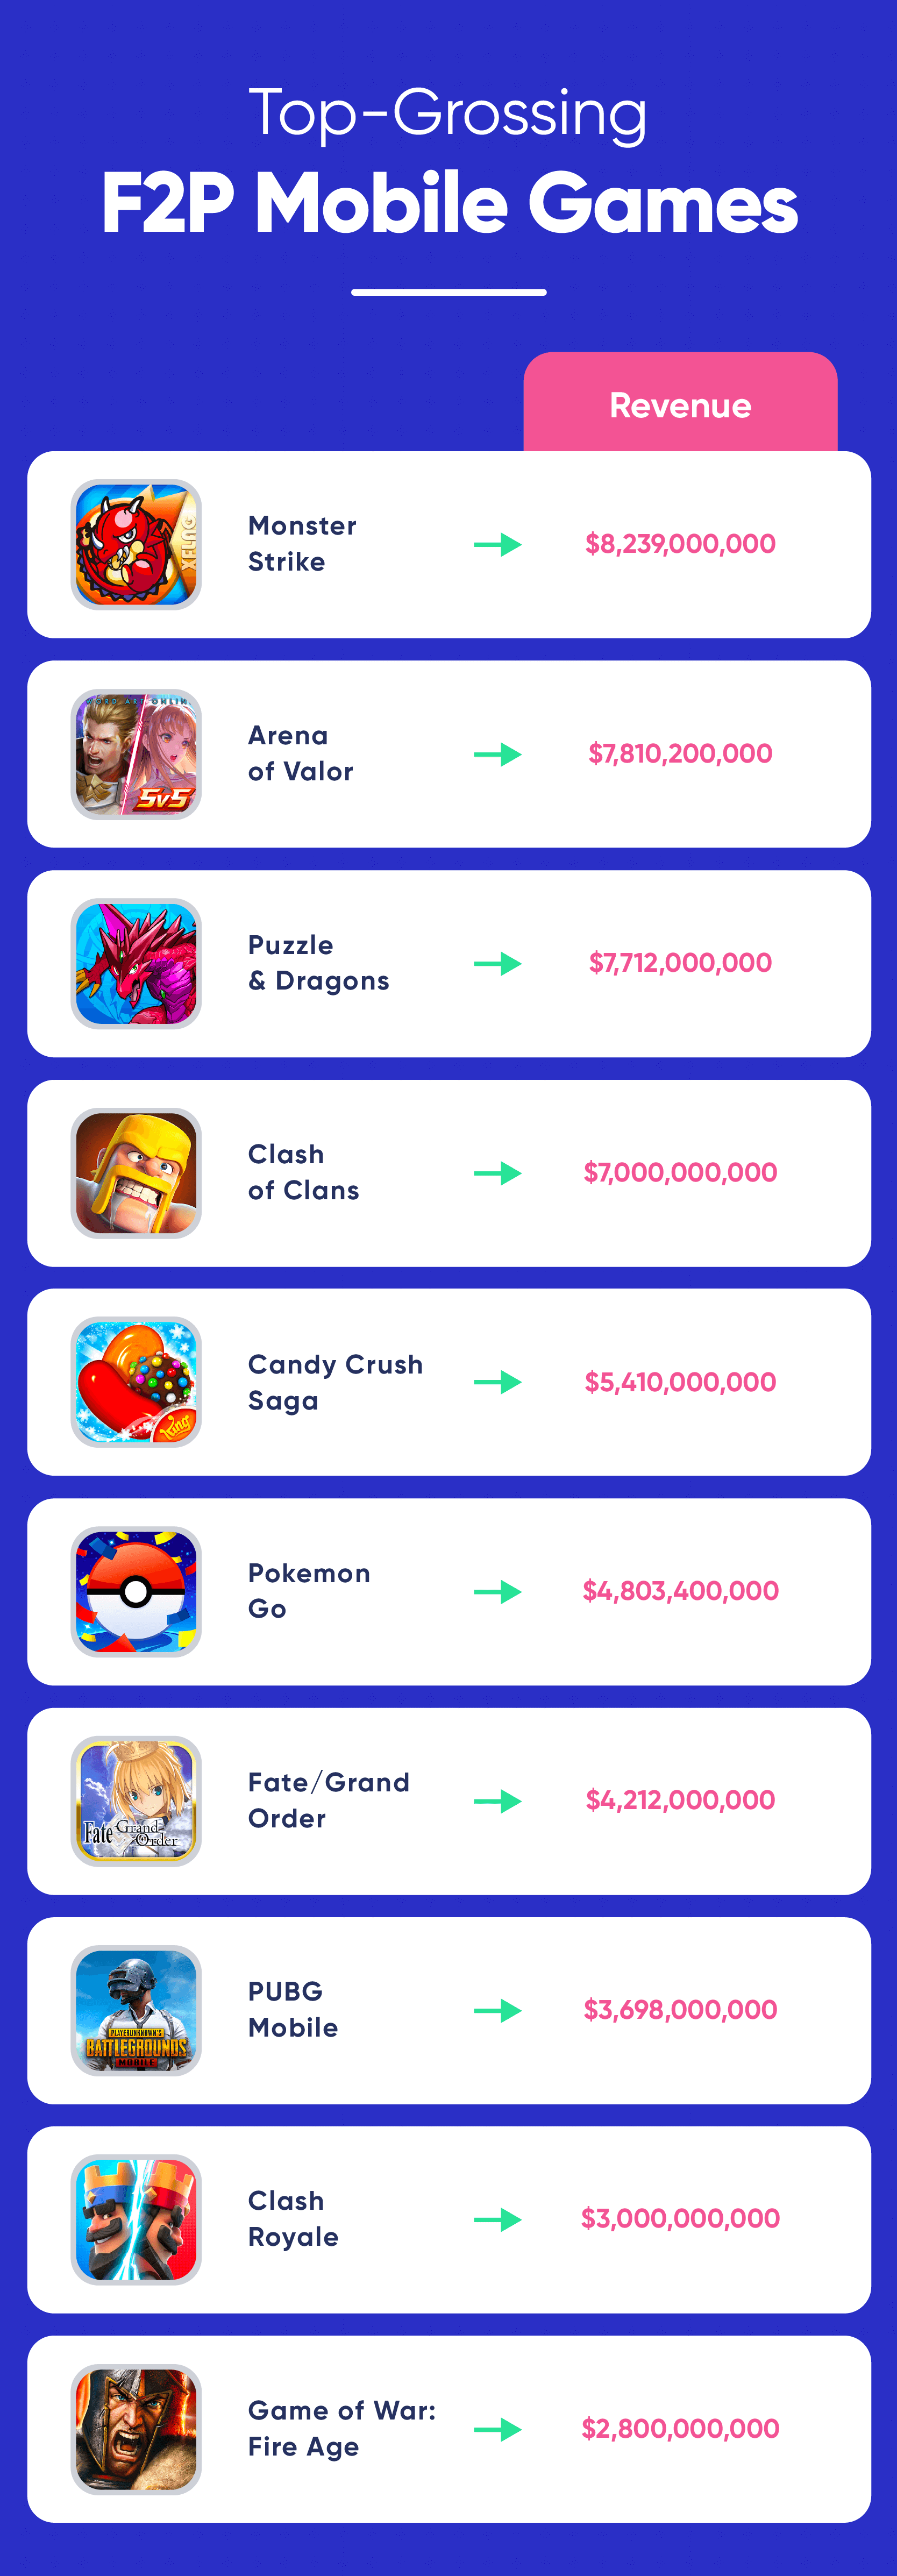 Mobile Game Monetization - All You Need to Know